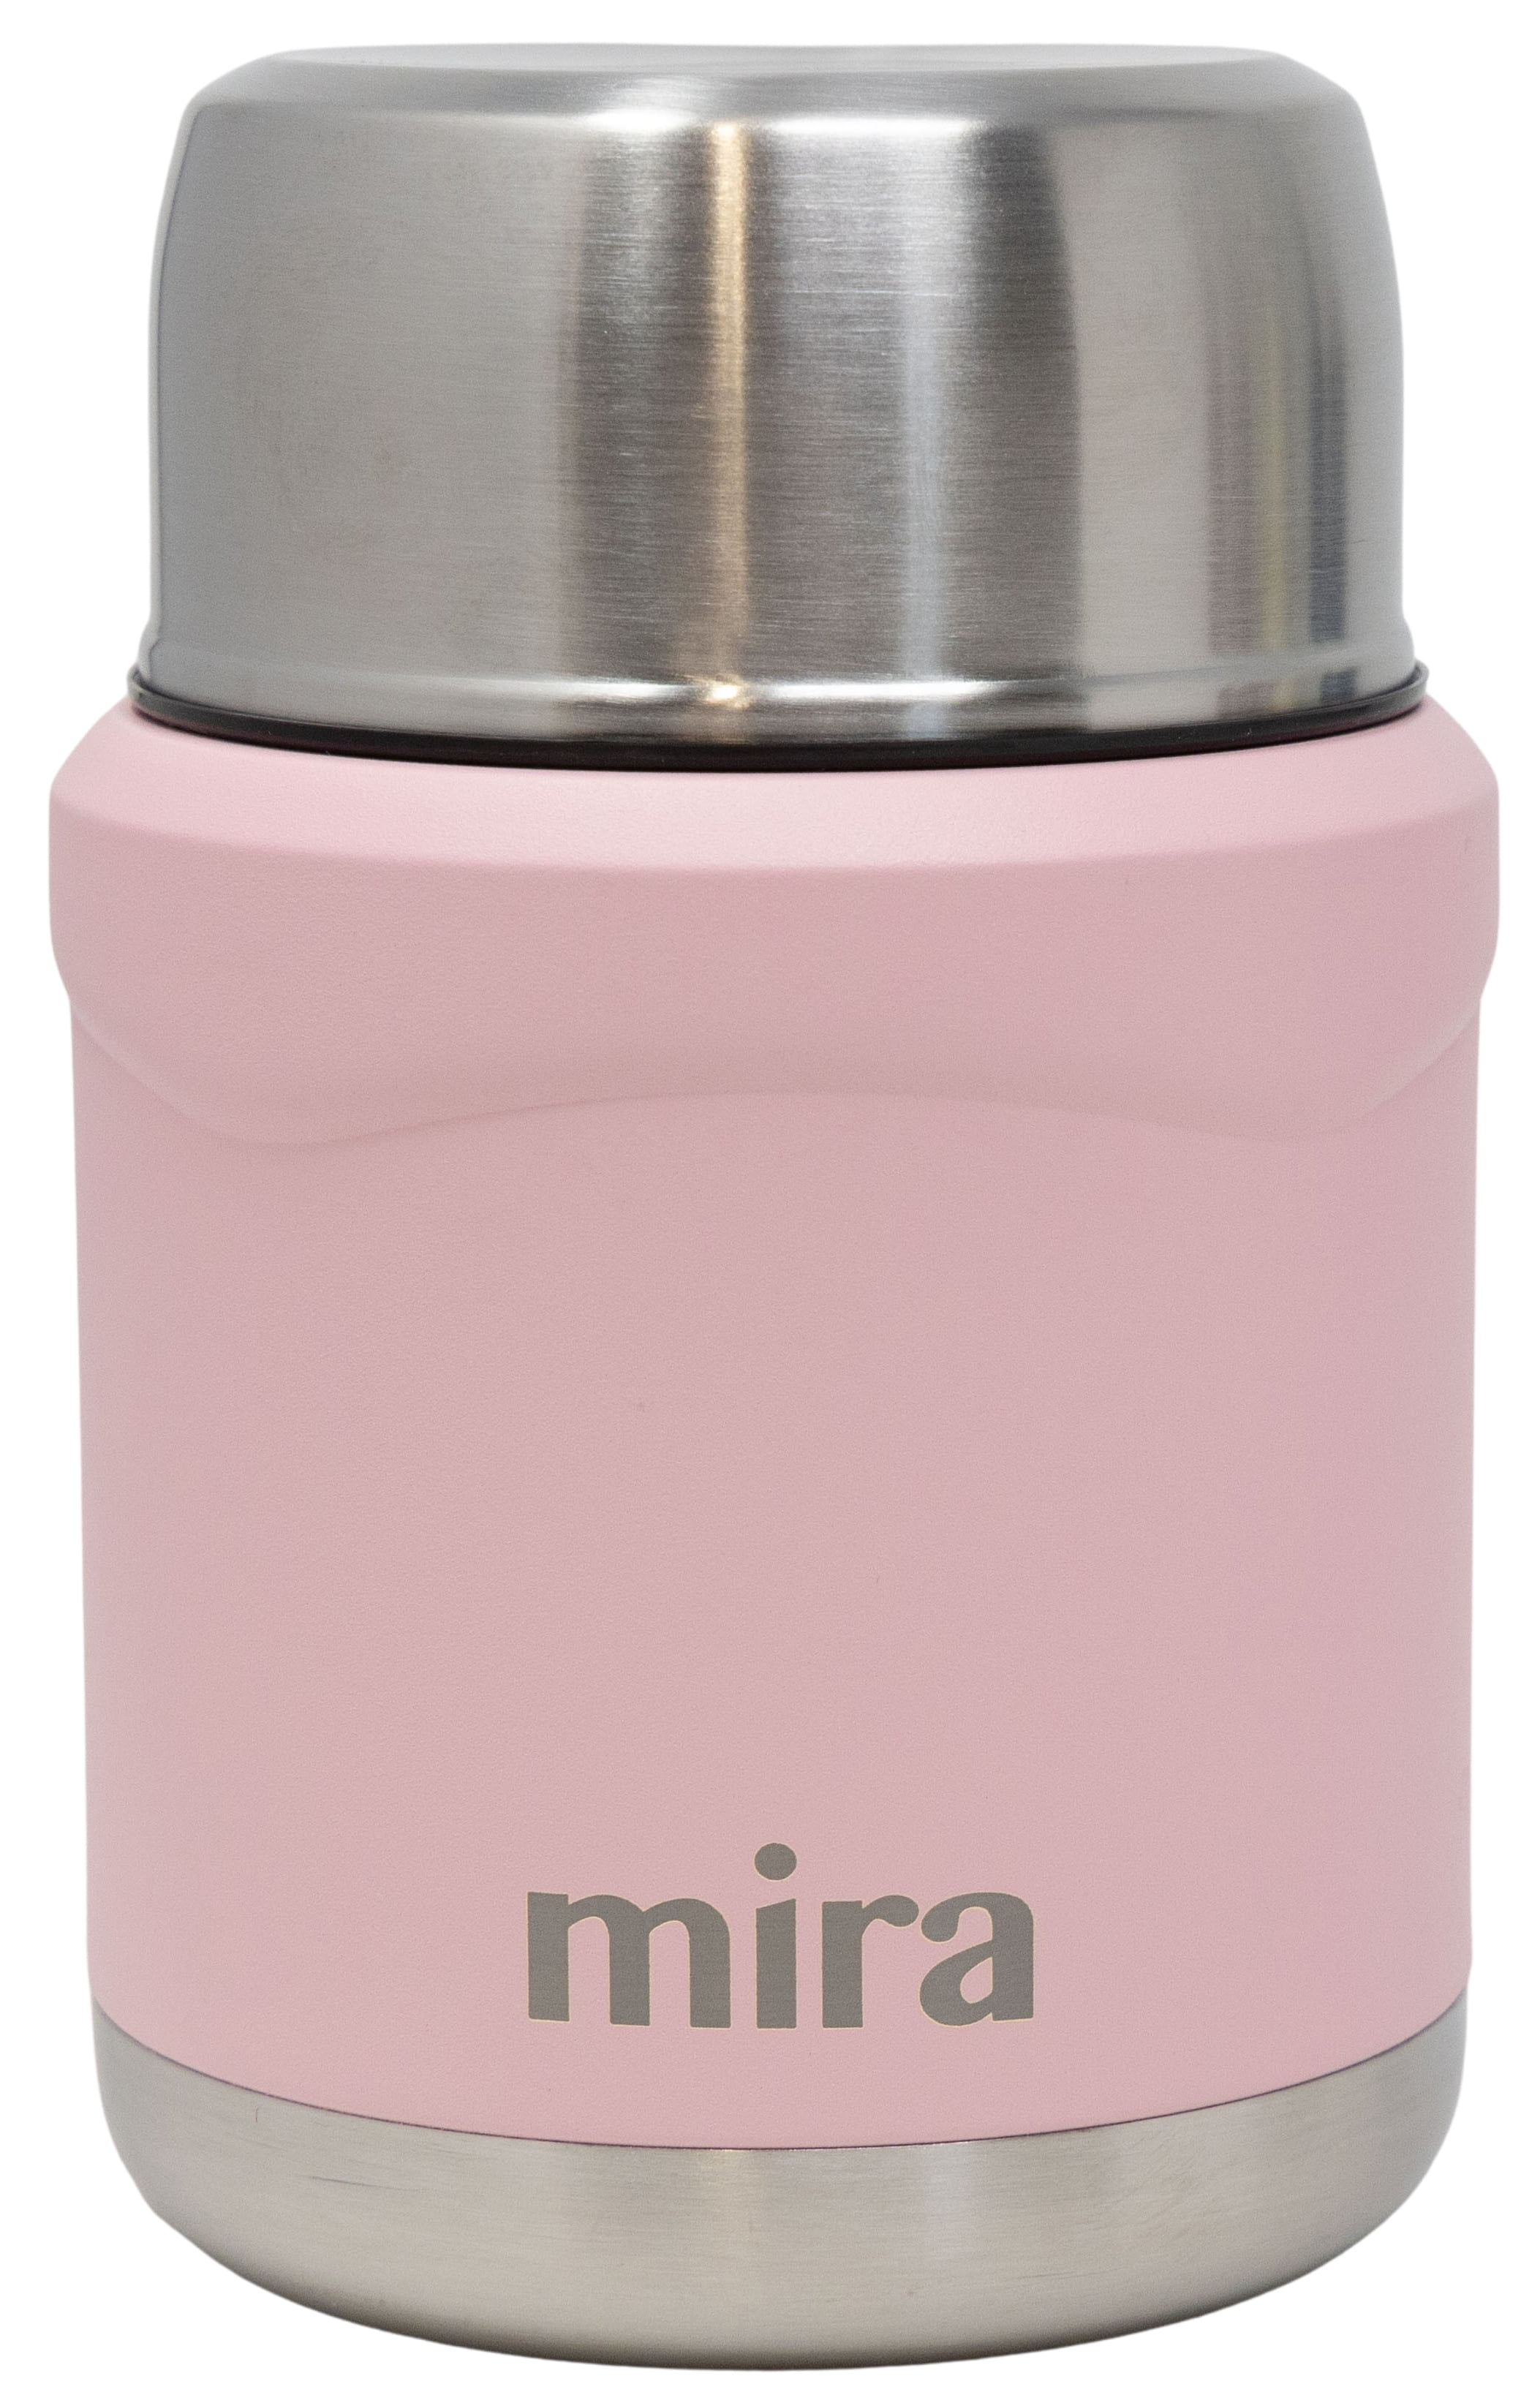 MIRA 15oz Thermos Food Jar with Spoon, Stainless Steel Vacuum Insulated,  Black 